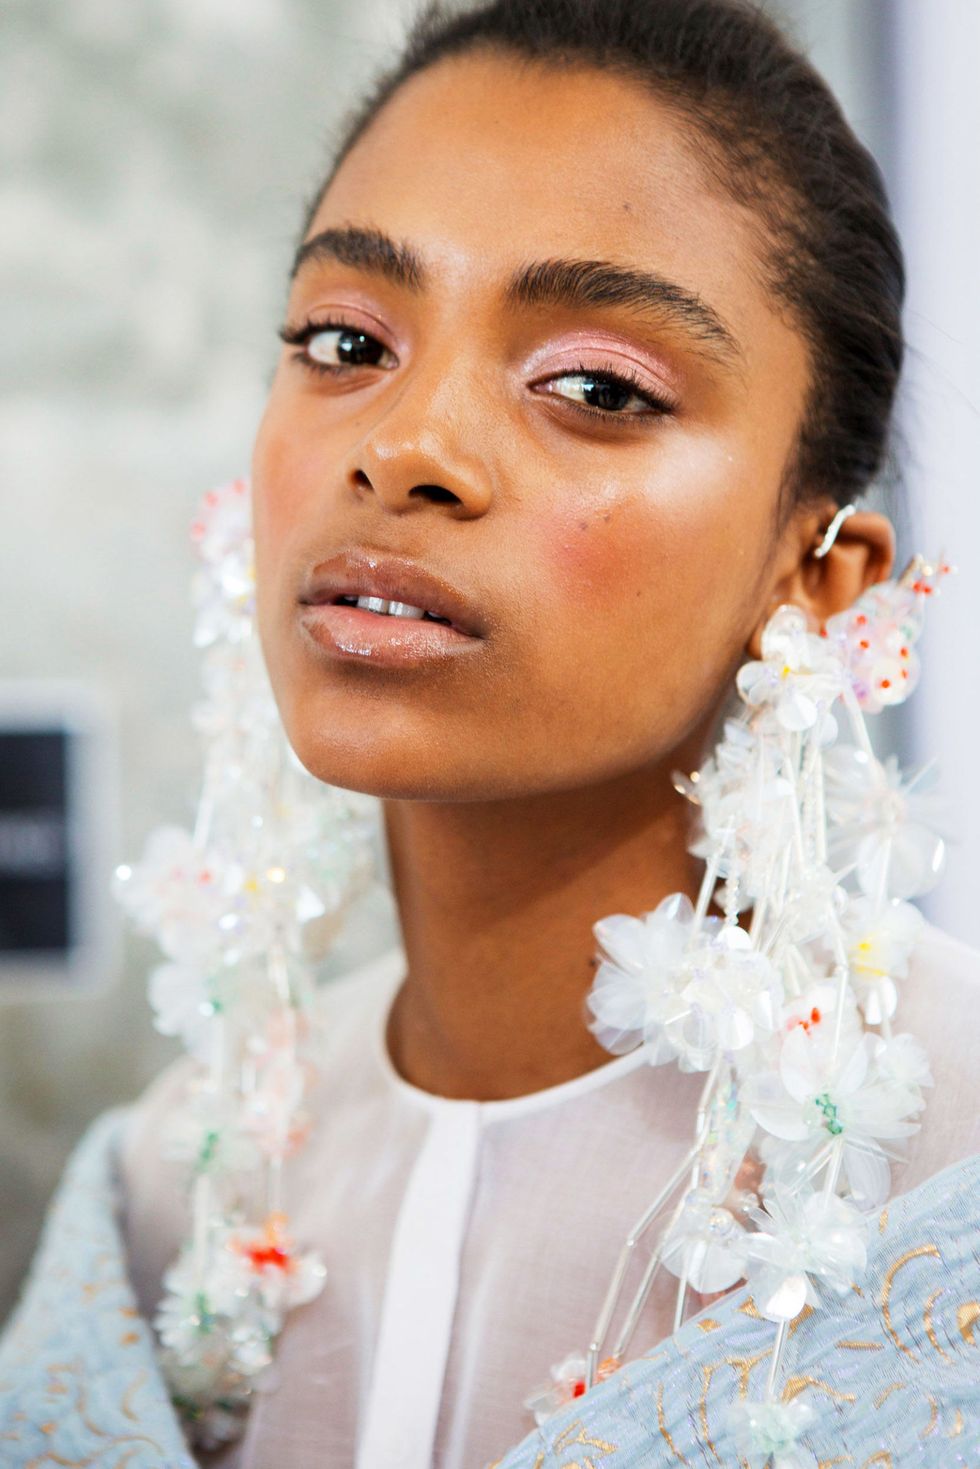 Spring 2017 Makeup Trends - Spring and Summer Beauty Trends From the Runway